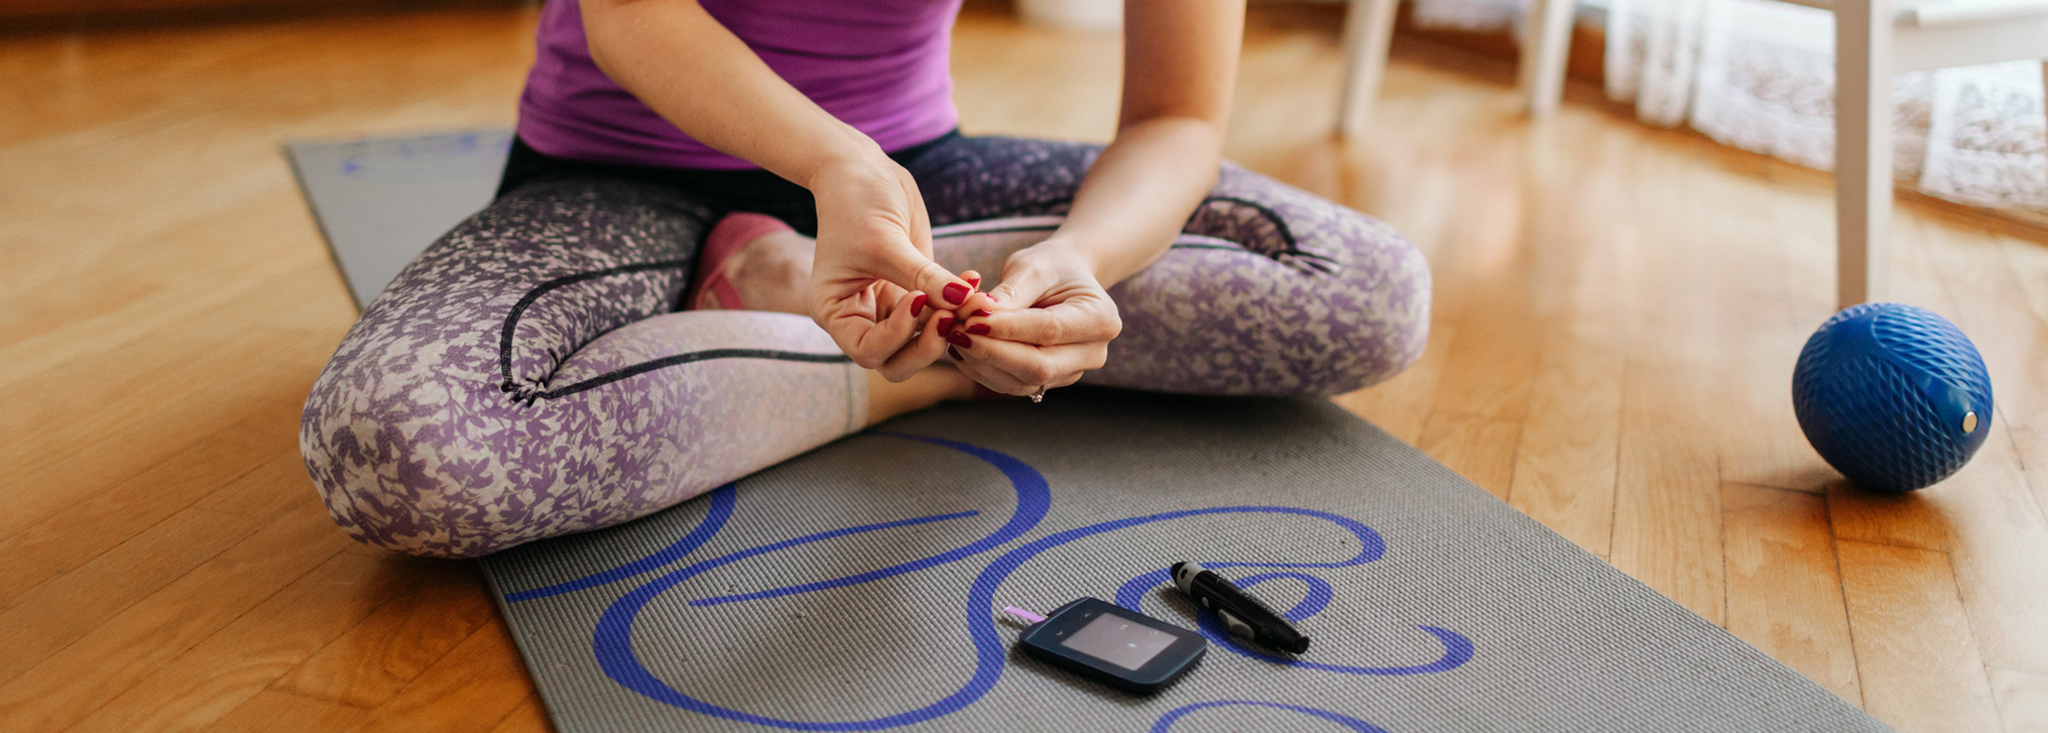 How to Balance Your Insulin Dose With Your Exercise